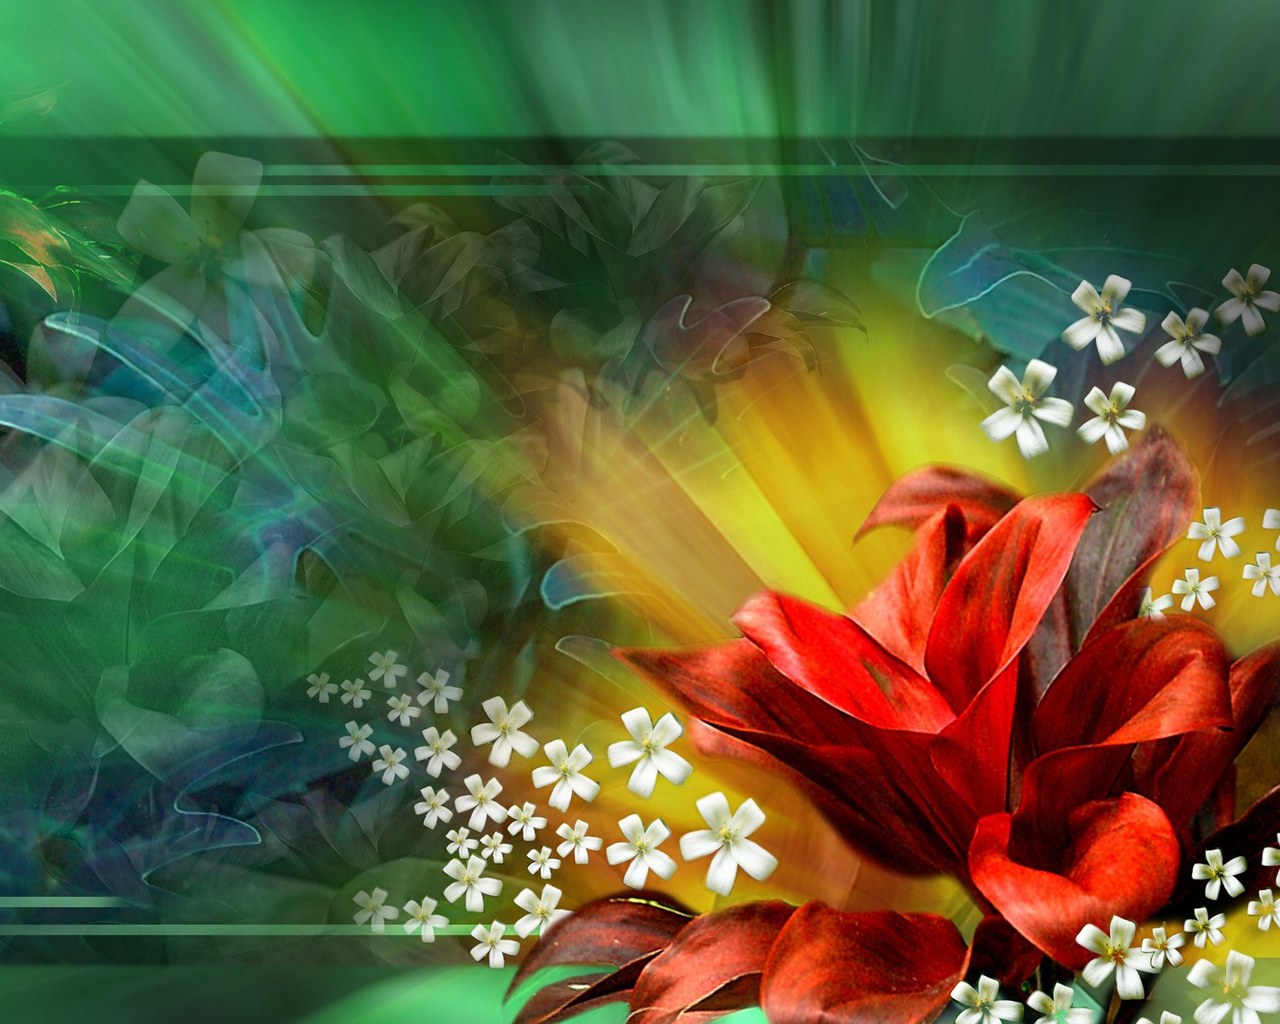  Download Desktop 3D Animated Background Wallpapers And Screensavers